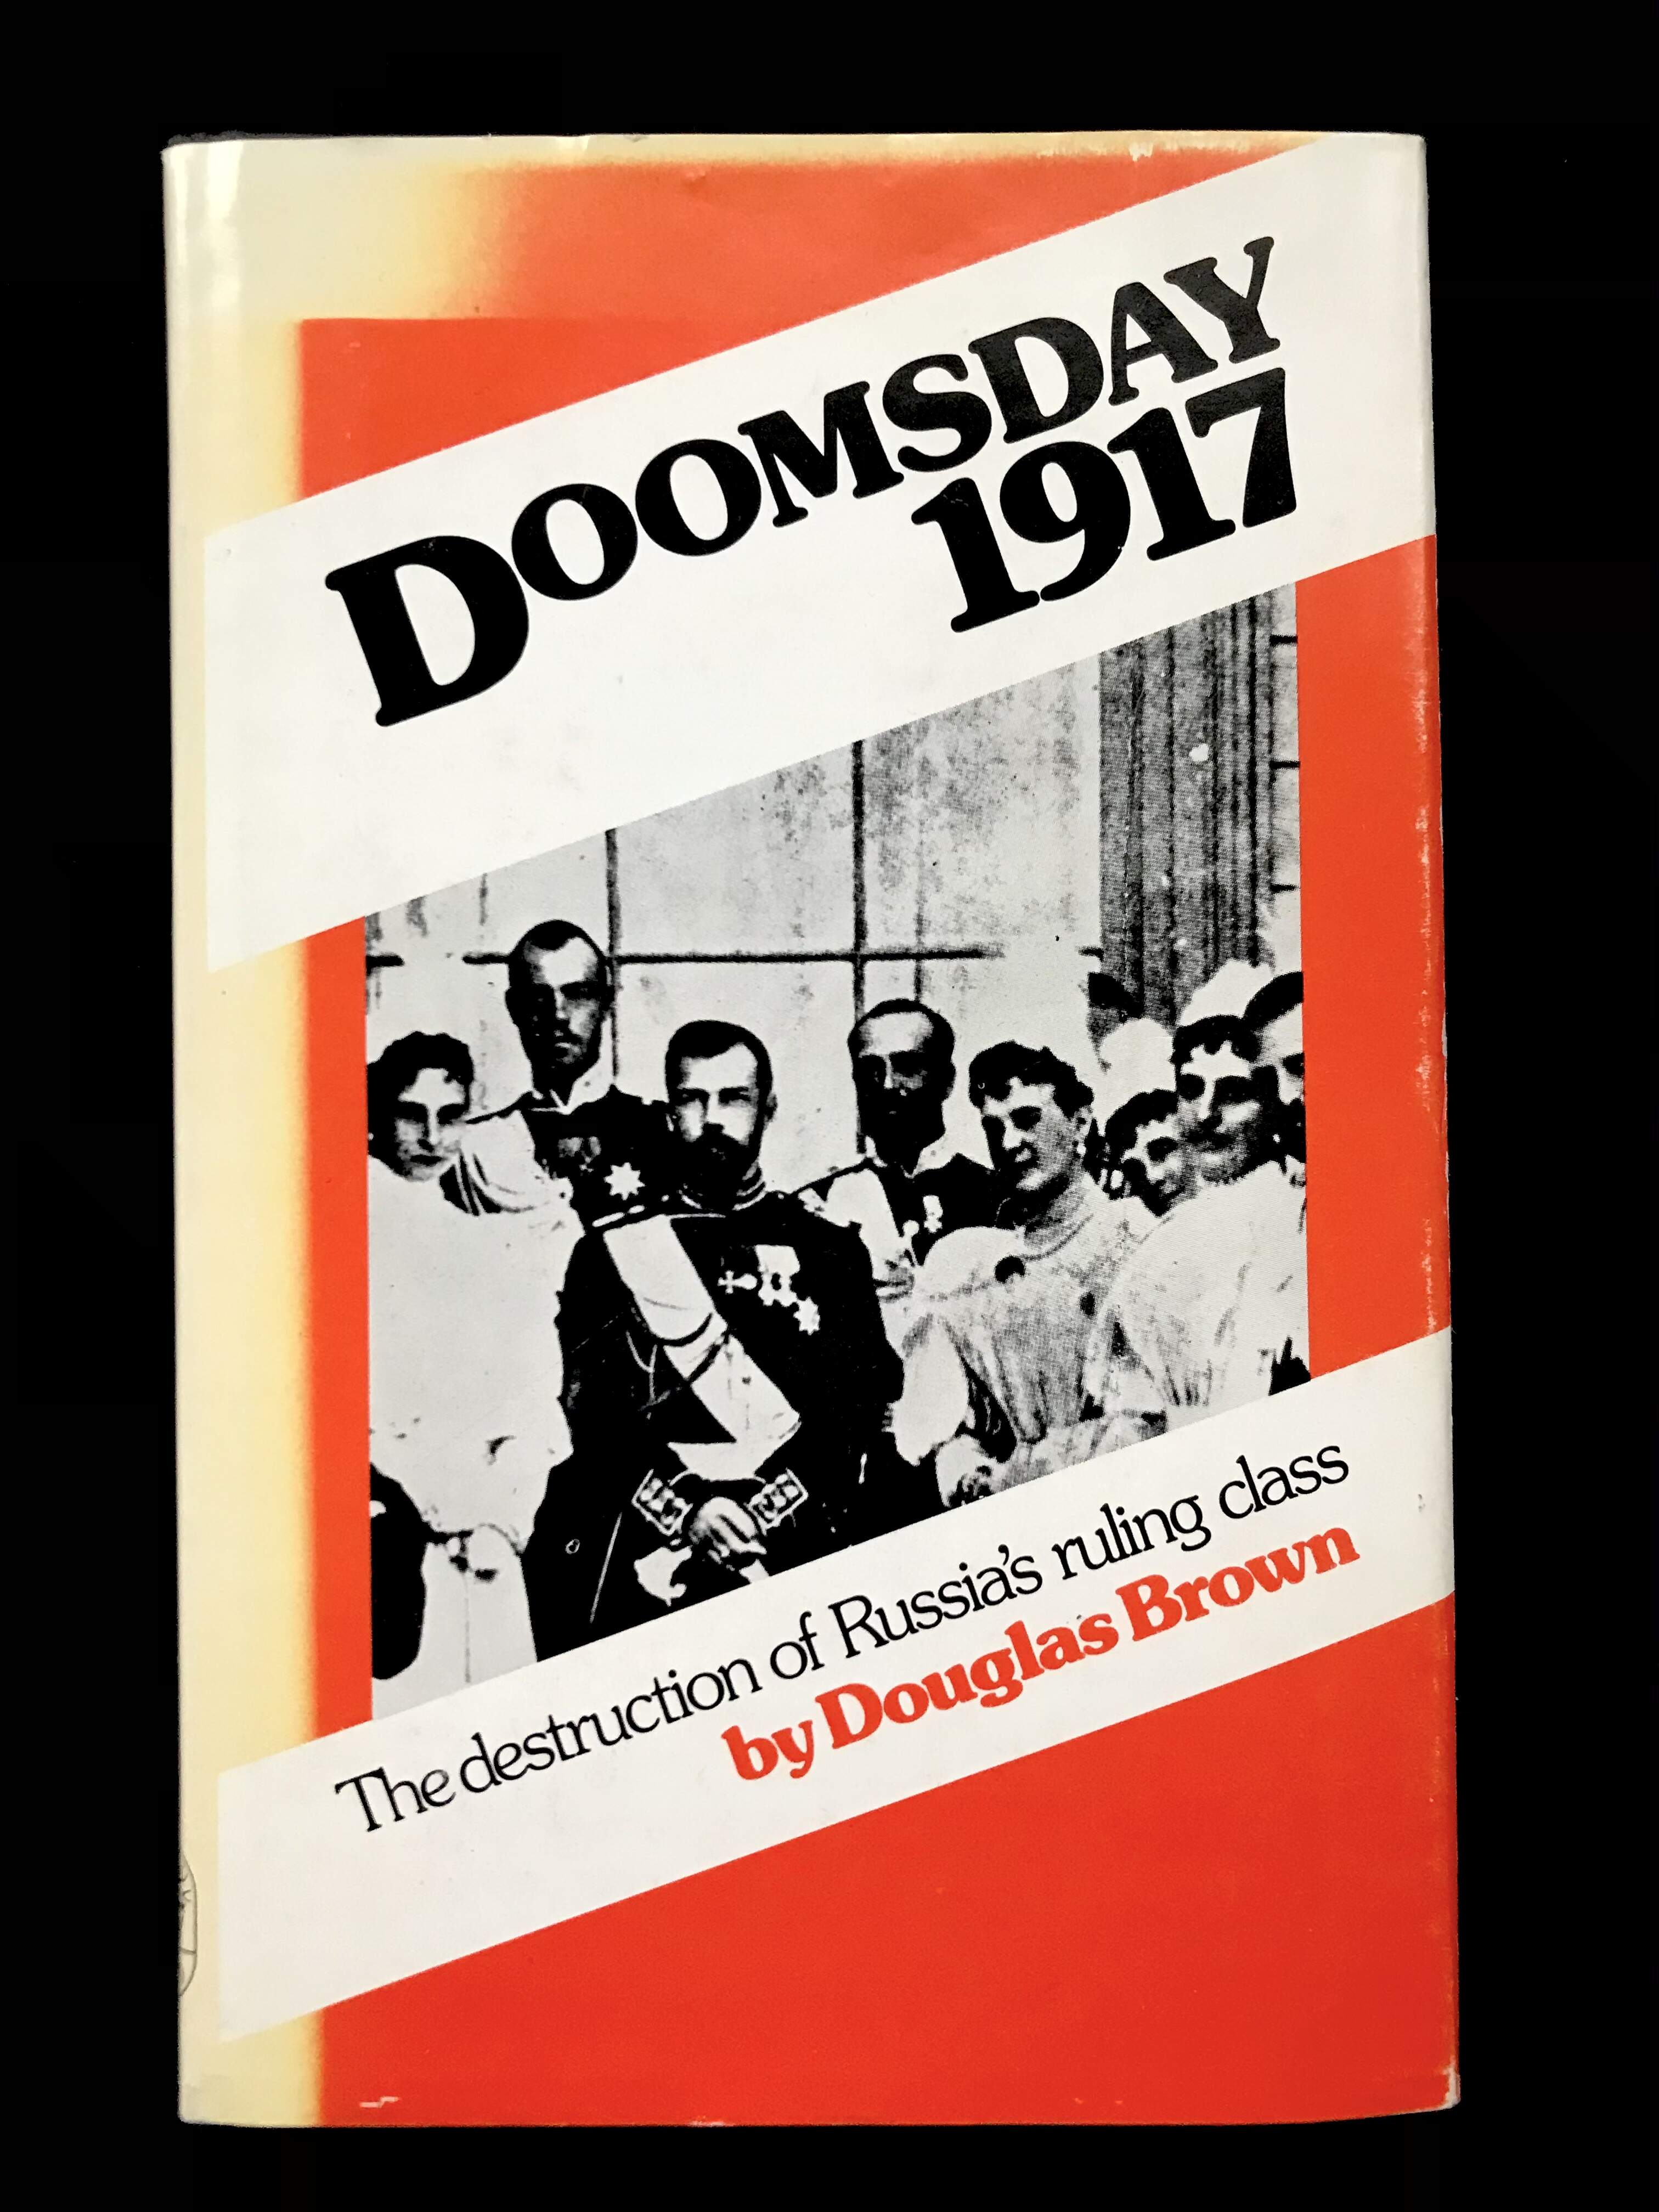 Doomsday 1917 by Douglas Brown